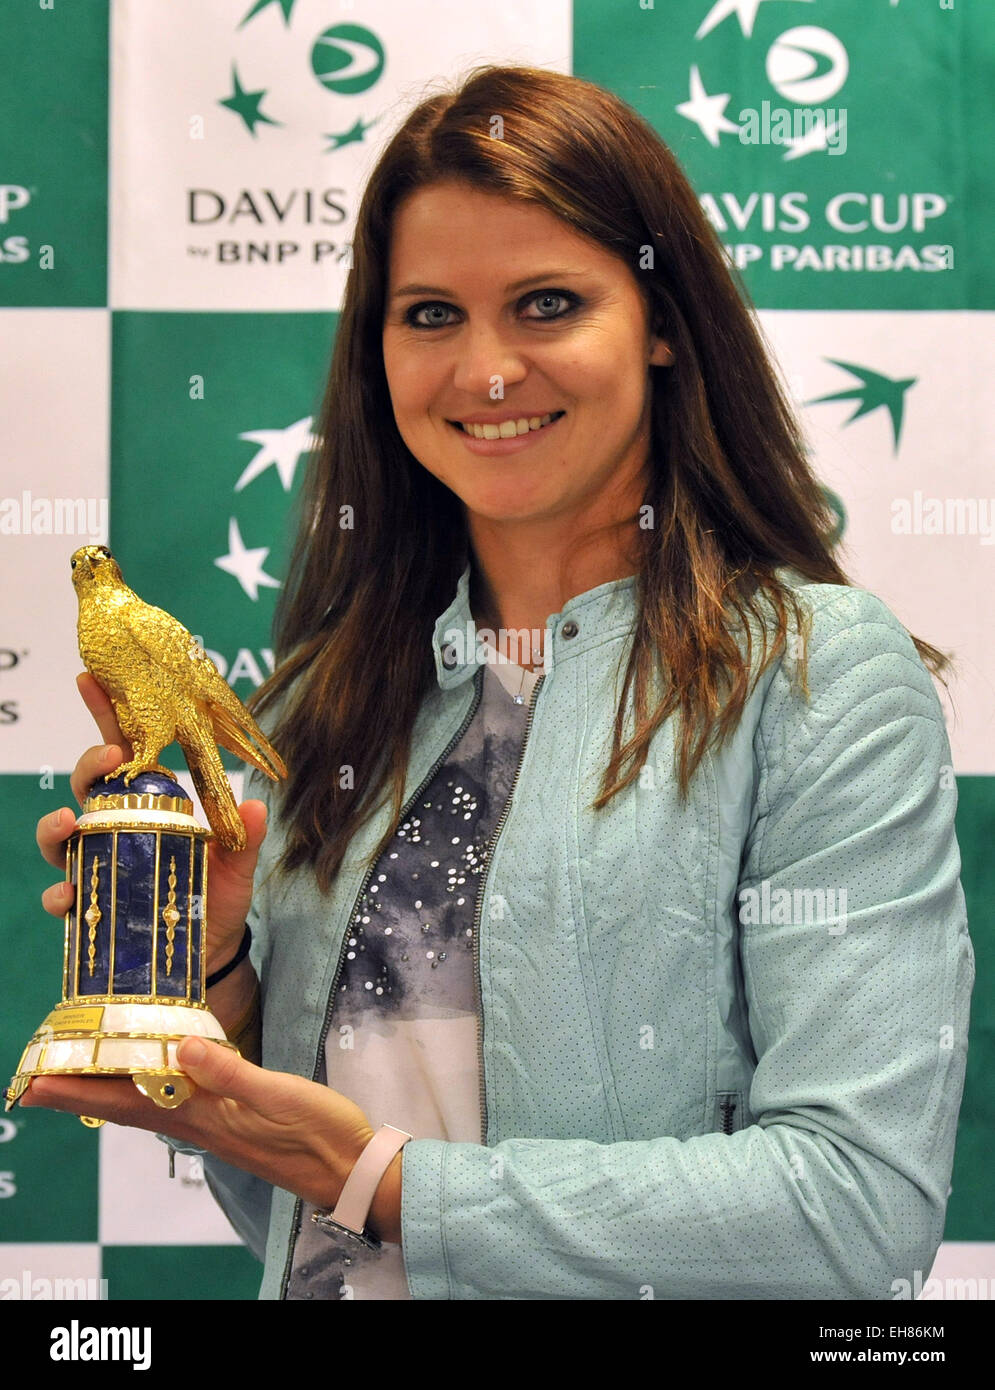 Ostrava, Czech Republic. 7th Mar, 2015. Czech tennis player Lucie Safarova pose for photo with the winner's trophy after her victory of the WTA Qatar Ladies Tennis Open in Doha, during the Davis Cup World Group first round doubles tennis match Czech Republic against Australia, in Ostrava, Czech Republic, Saturday, March 7, 2015. © Jaroslav Ozana/CTK Photo/Alamy Live News Stock Photo